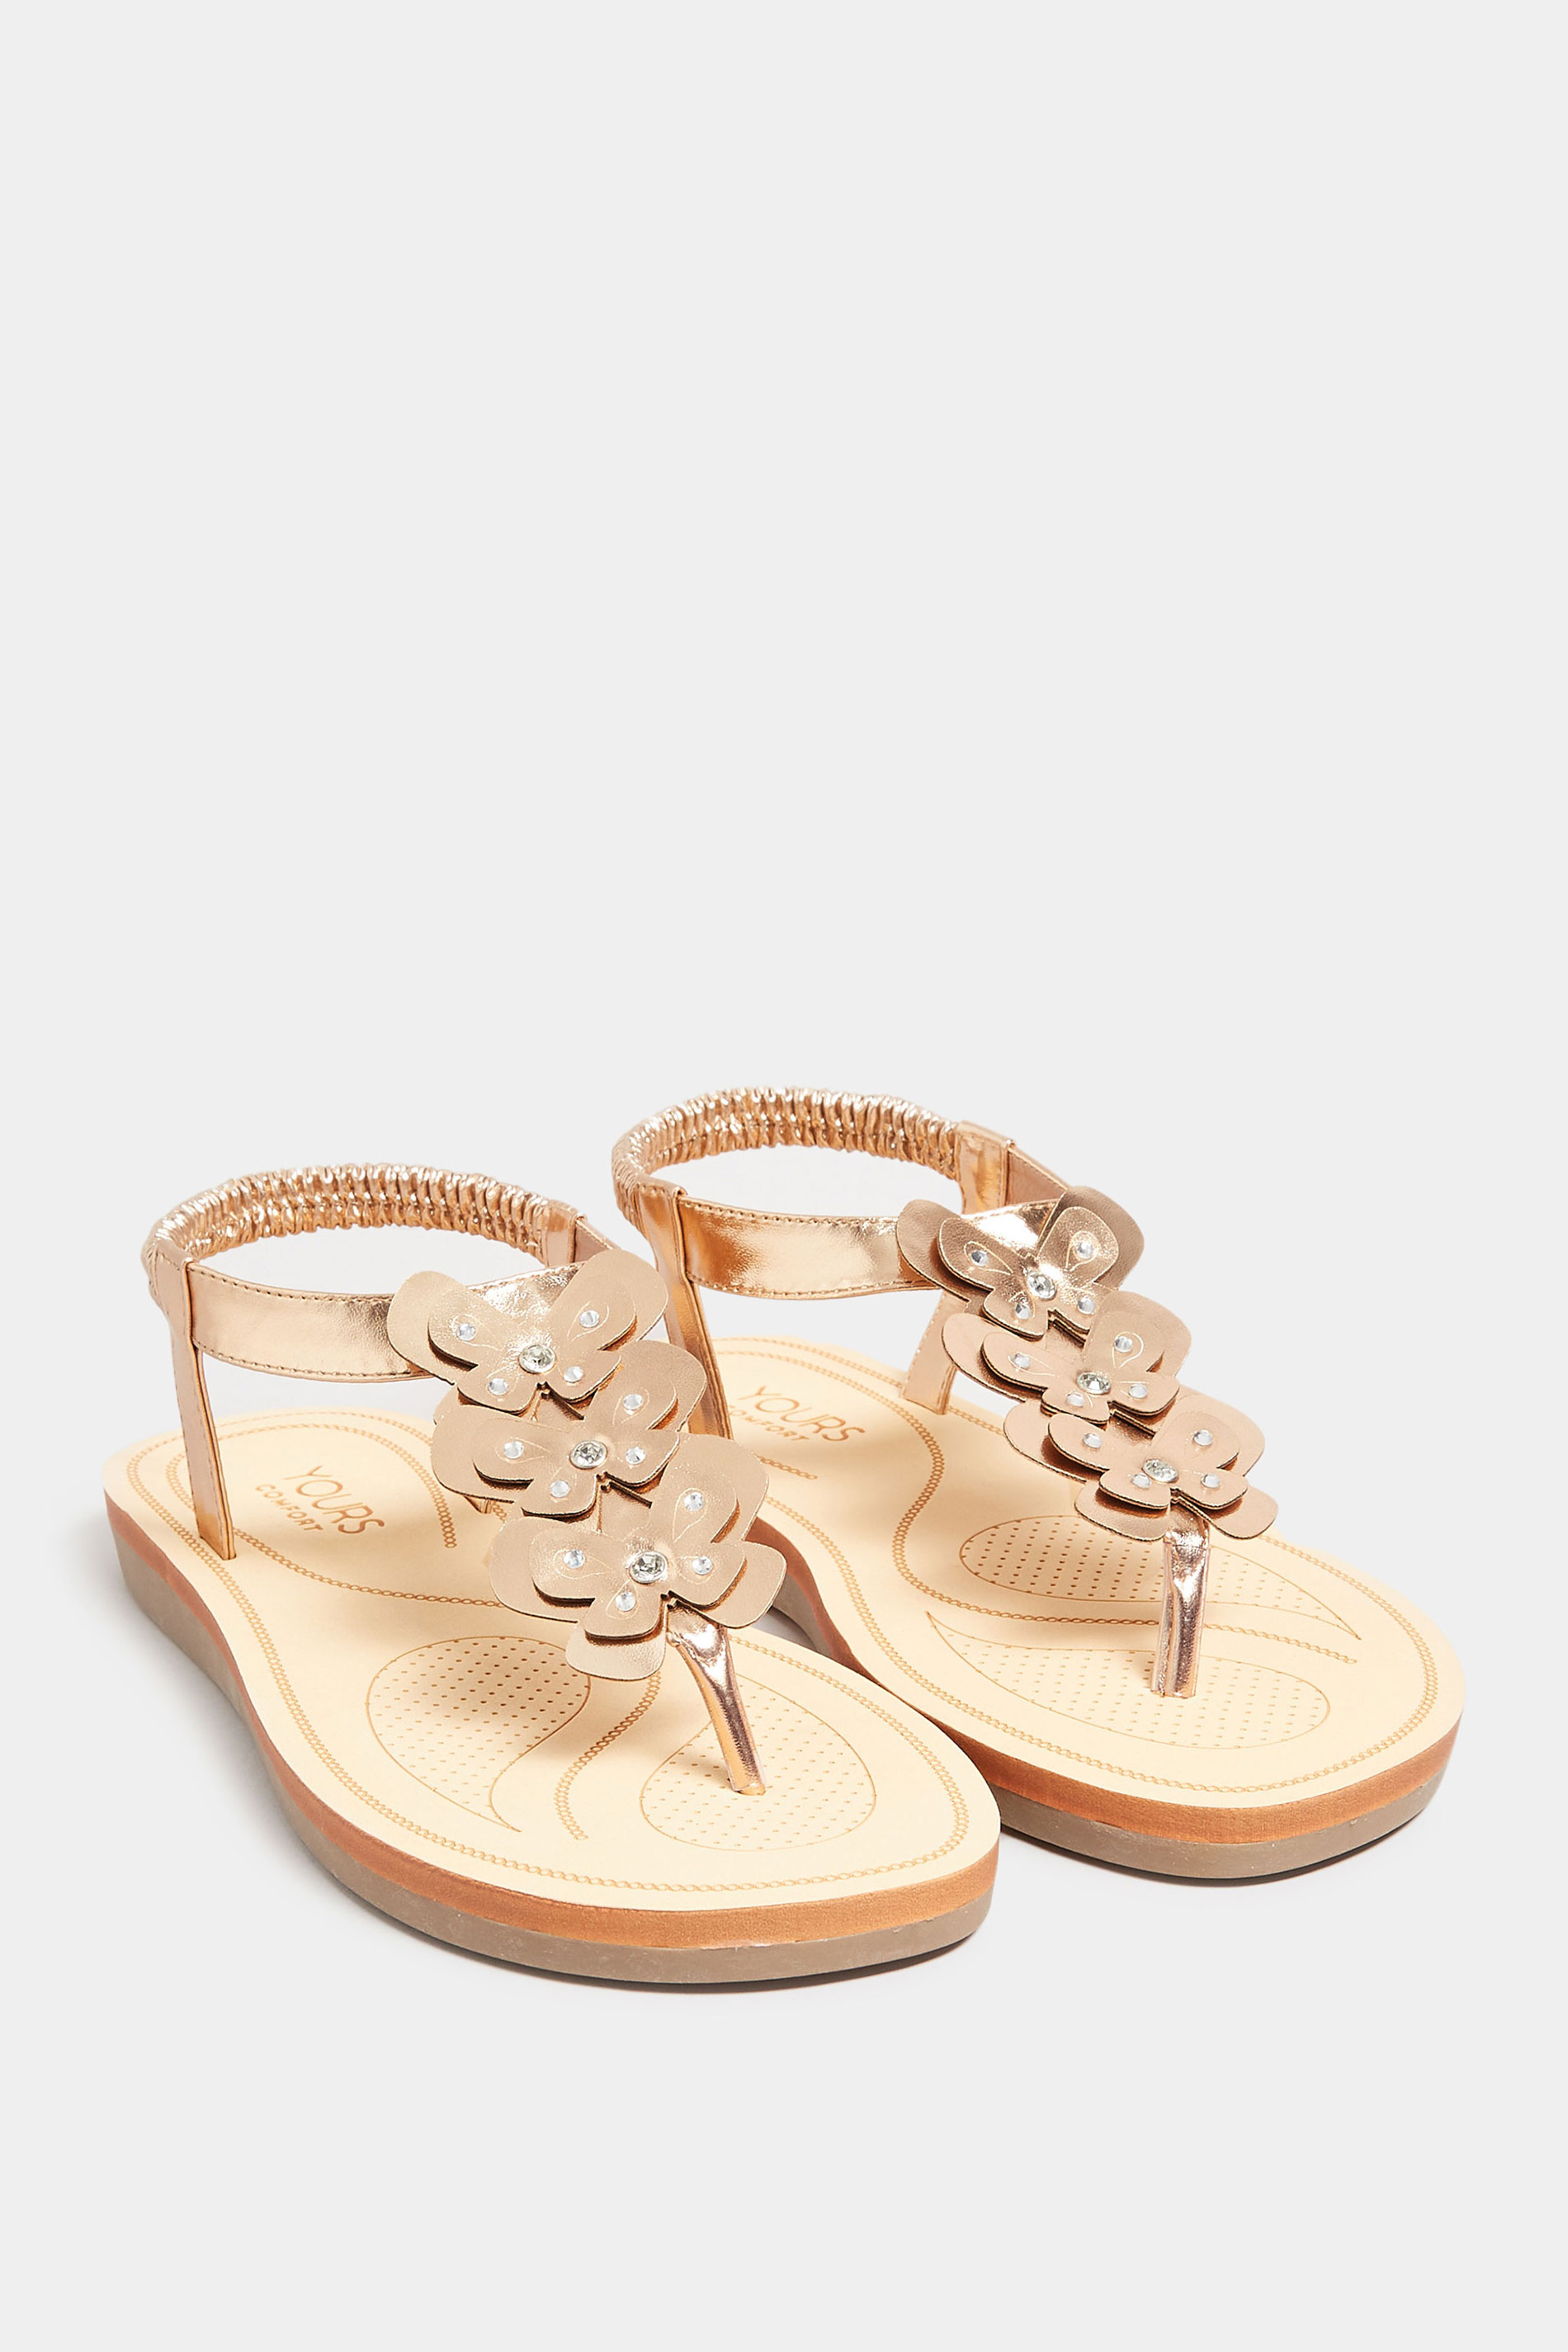 Rose Gold Diamante Butterfly Sandals In Extra Wide EEE Fit | Yours Clothing 2